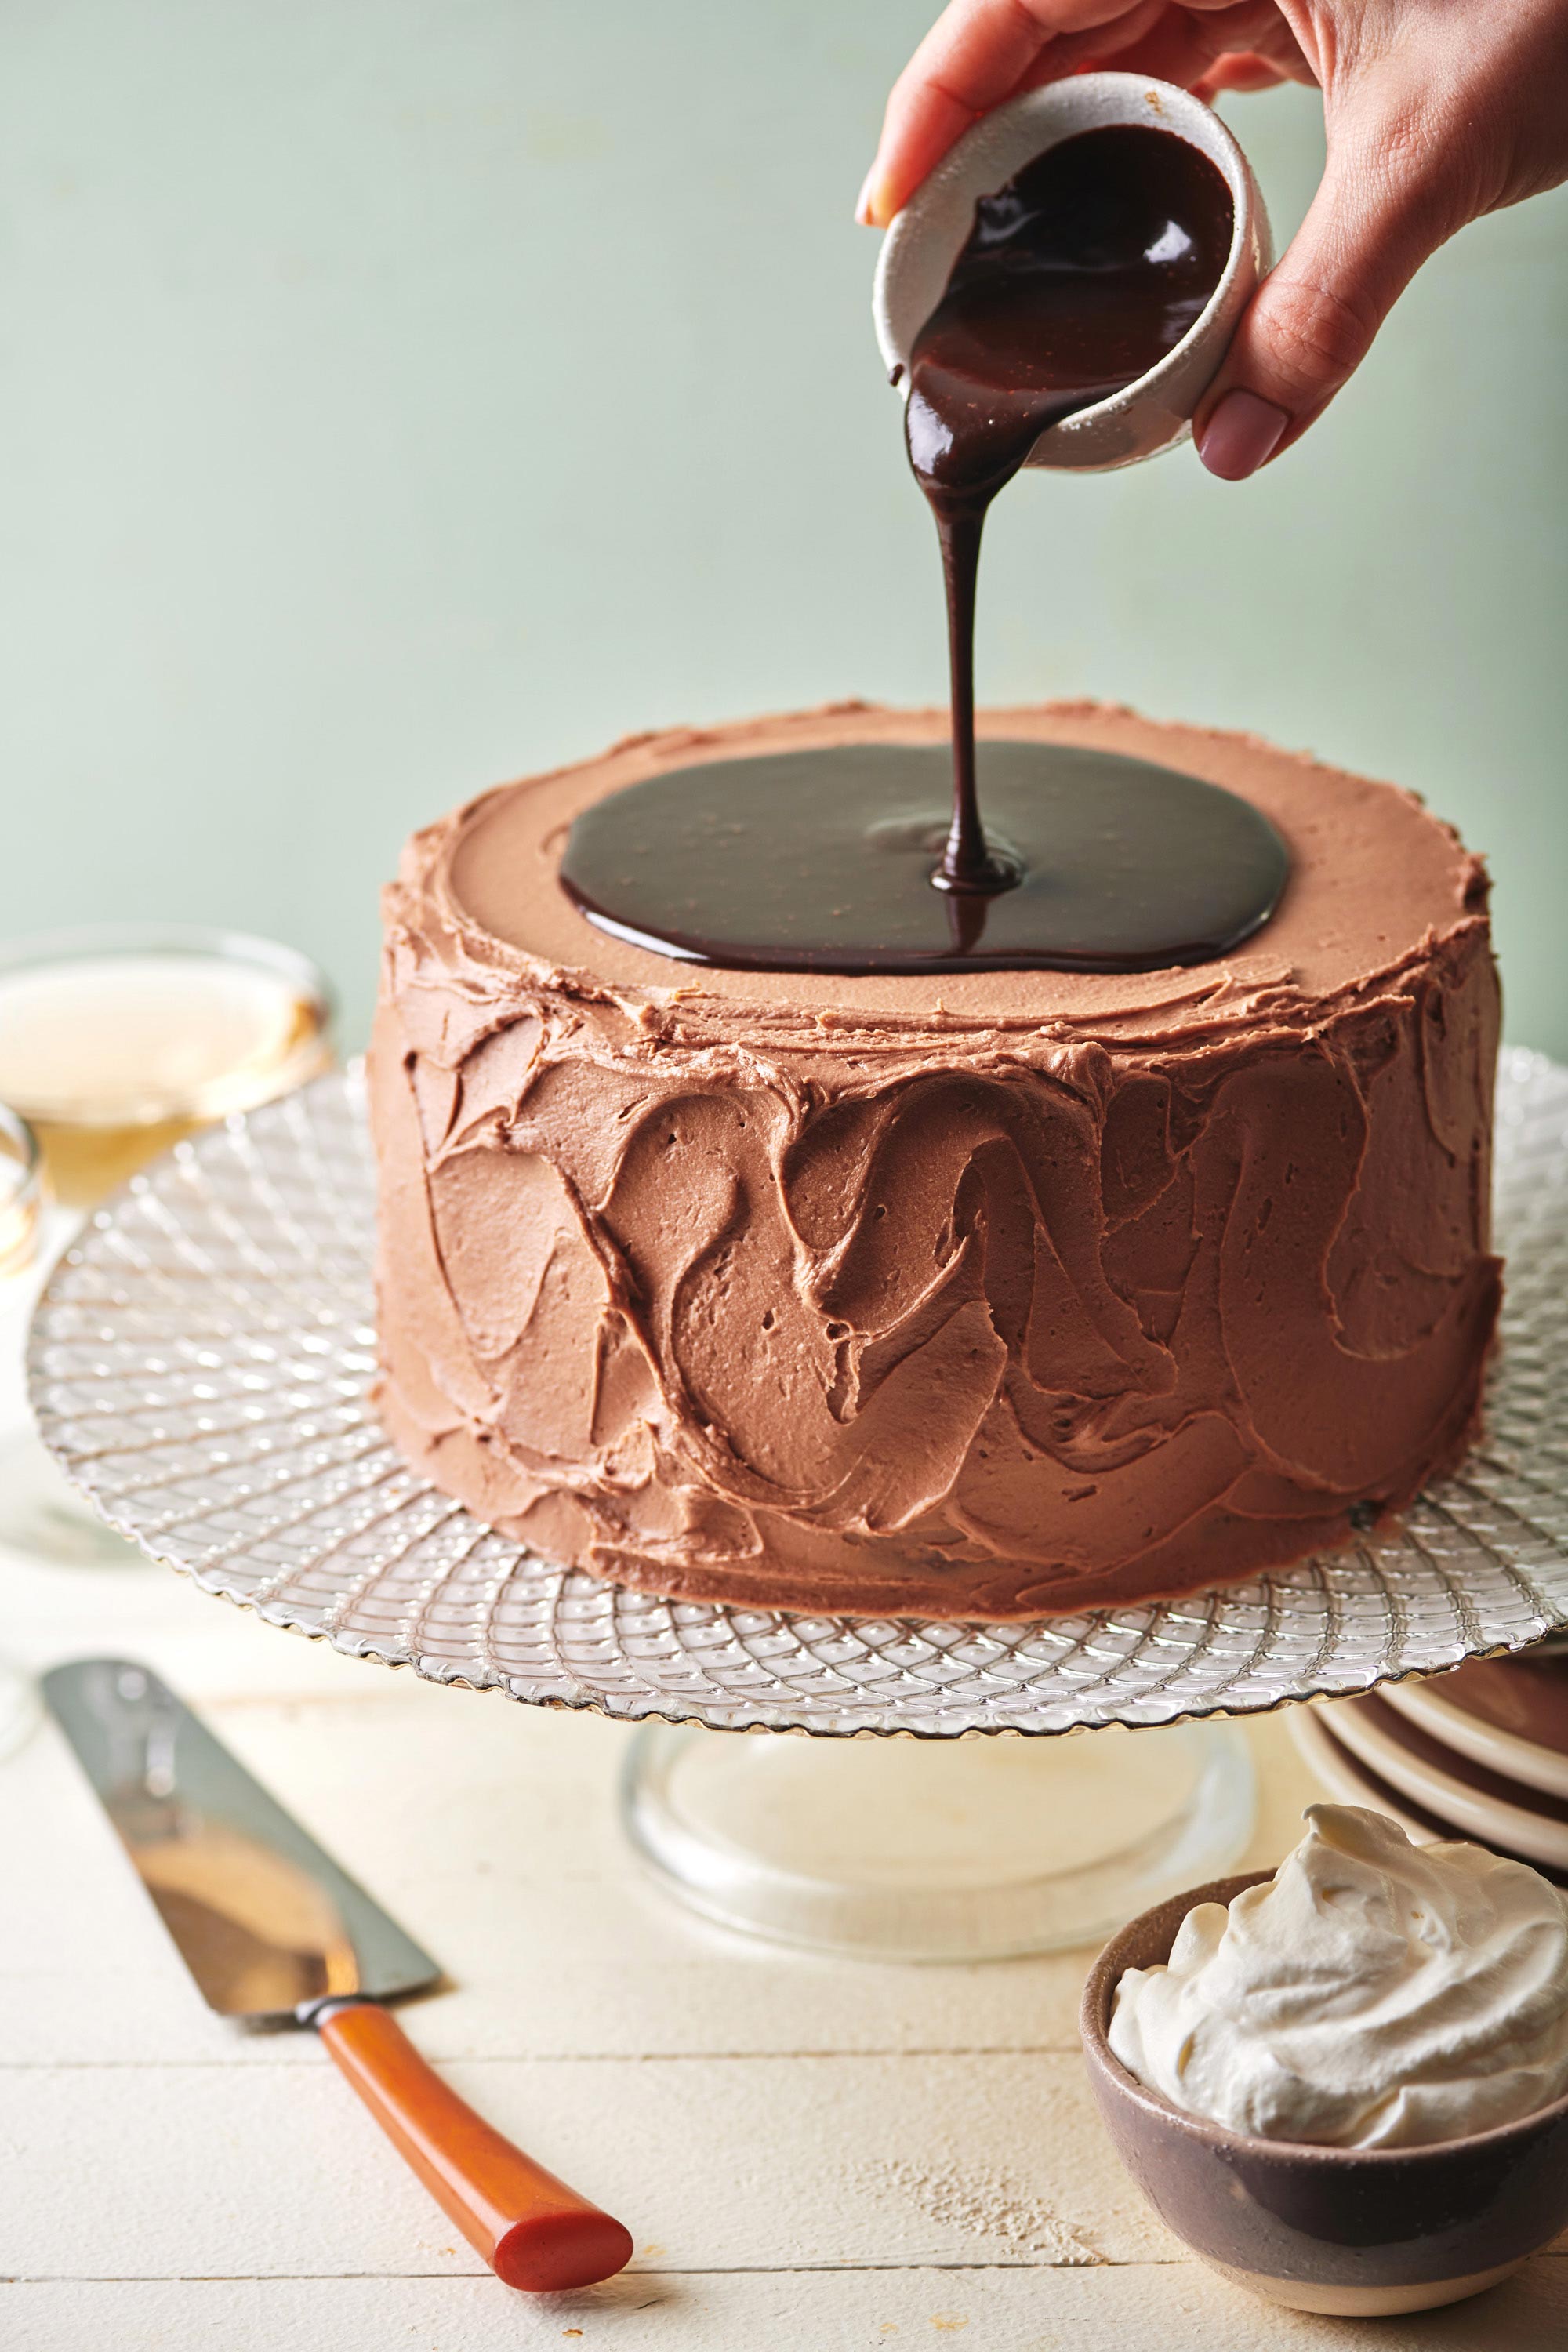 Chocolate pouring onto a Devil's Food Cake.